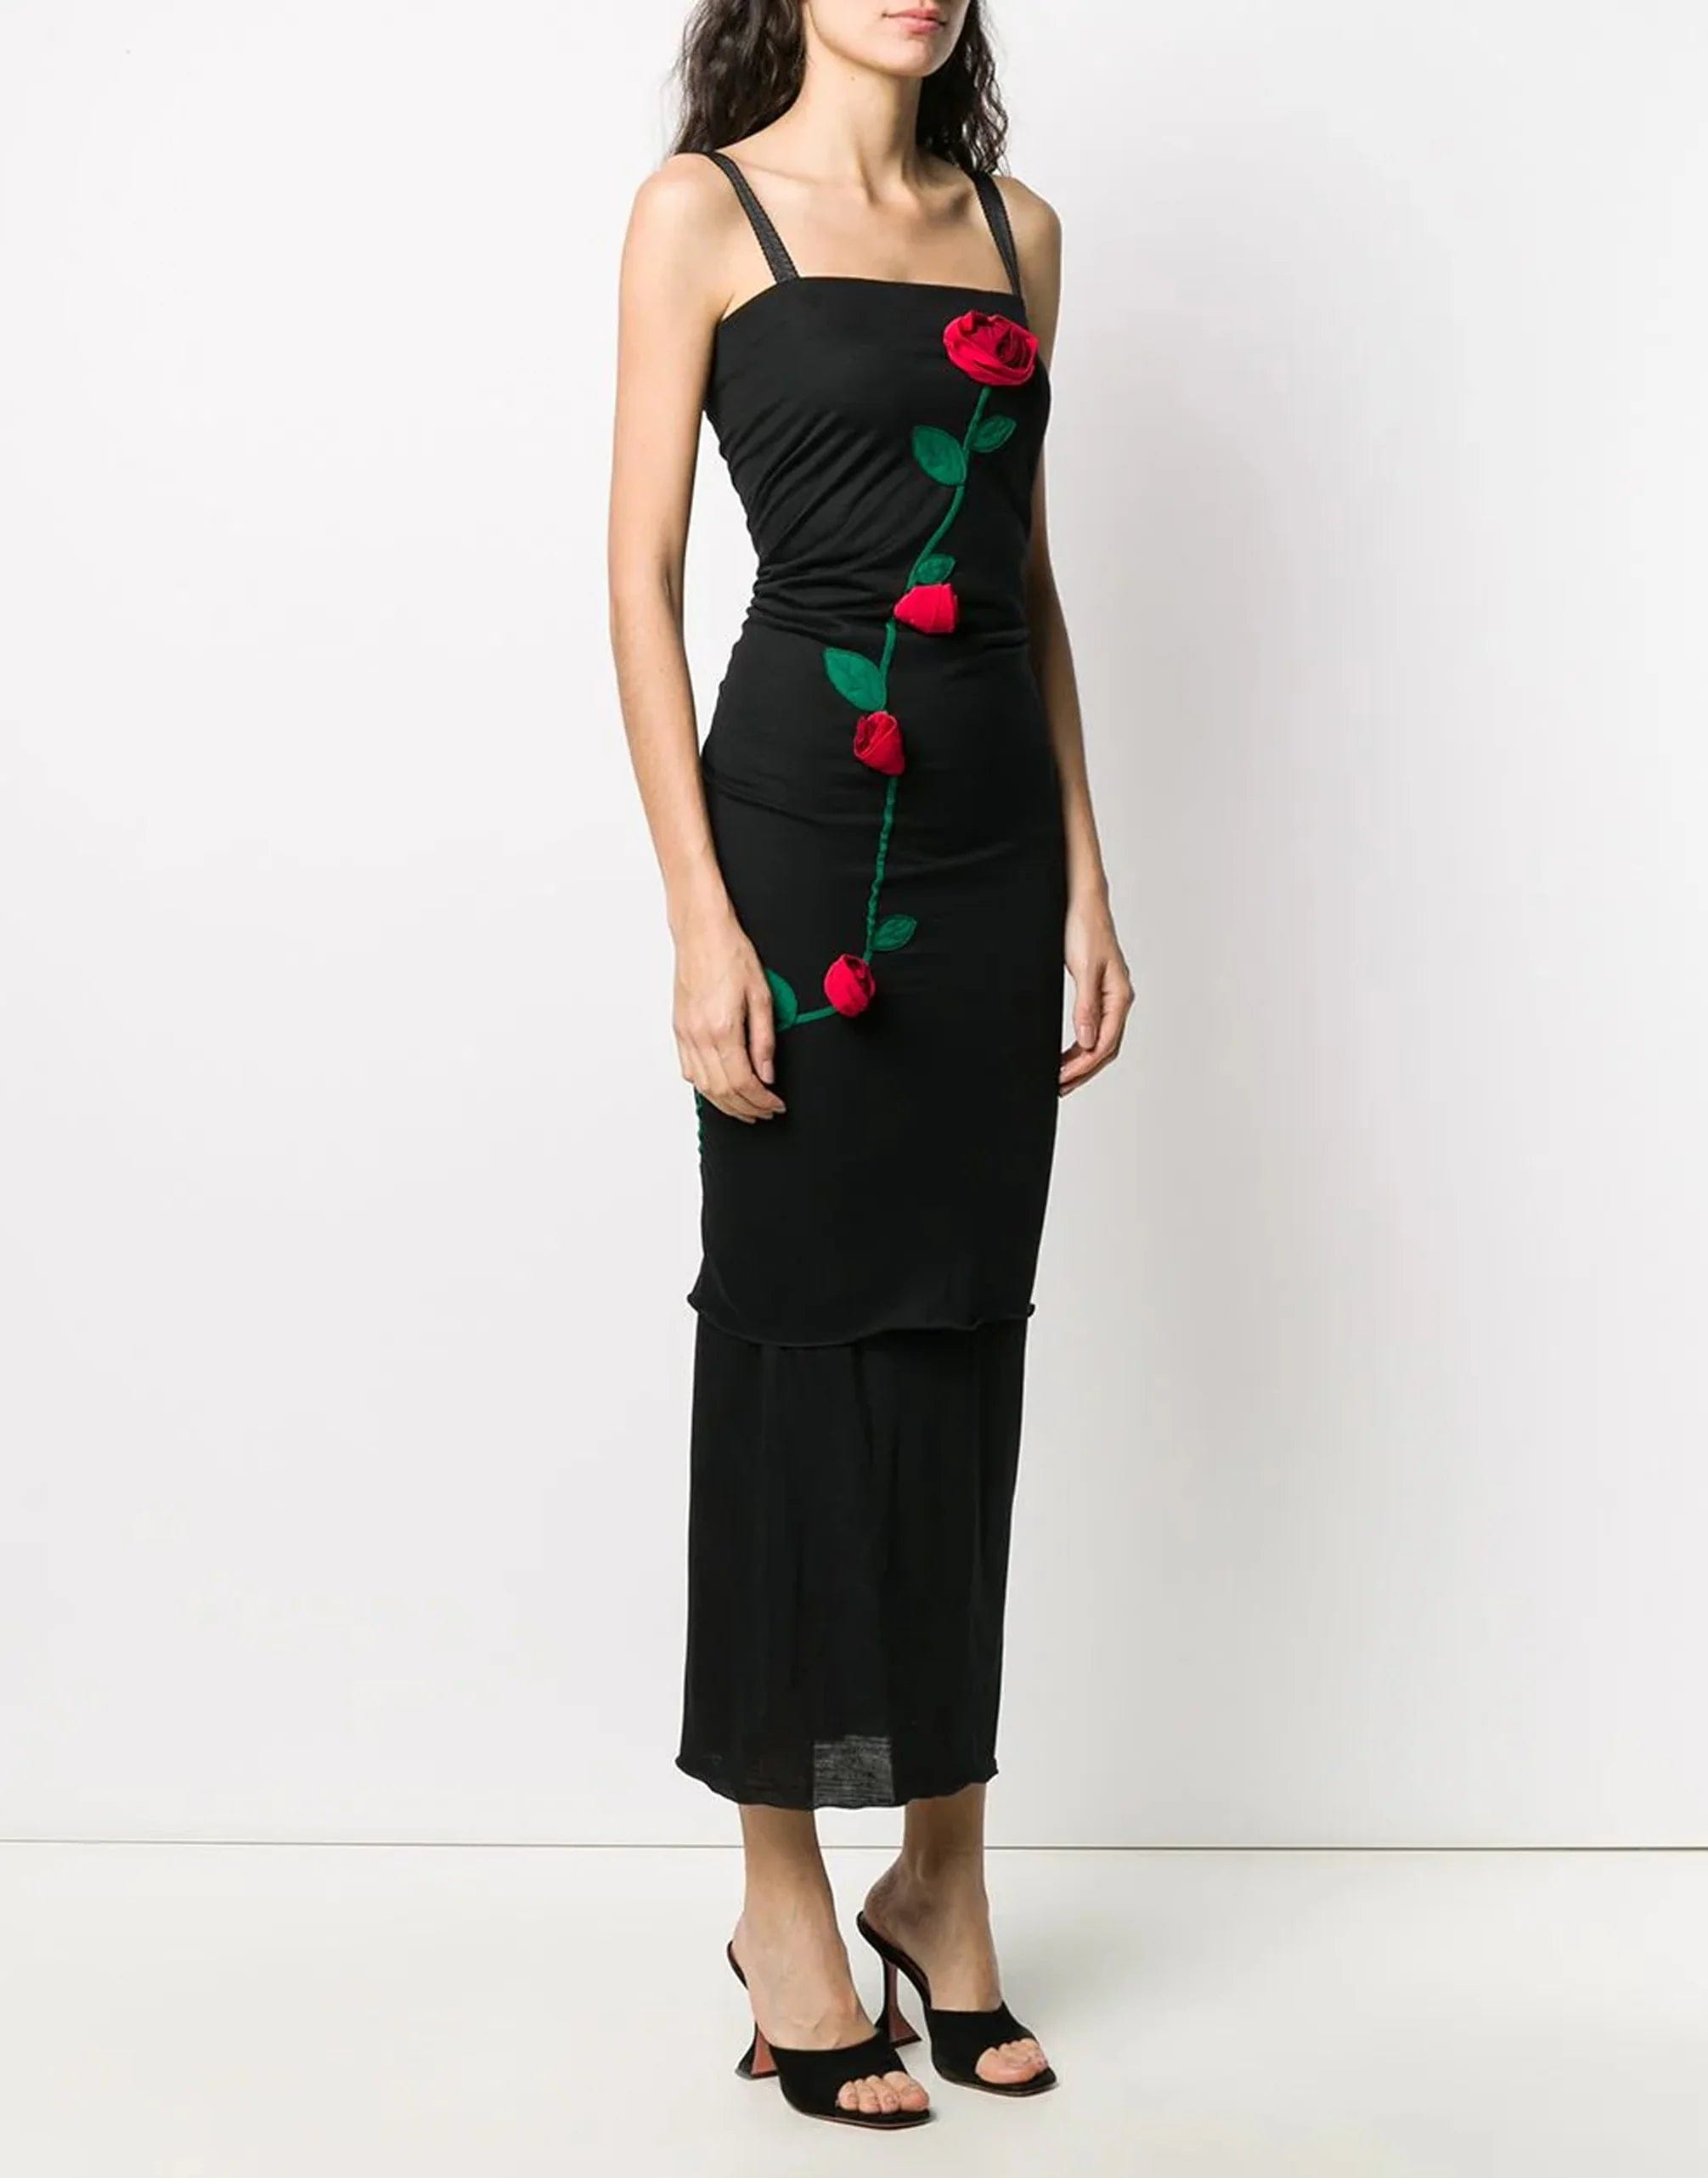 Dolce & Gabbana Rose Applique Fitted Dress